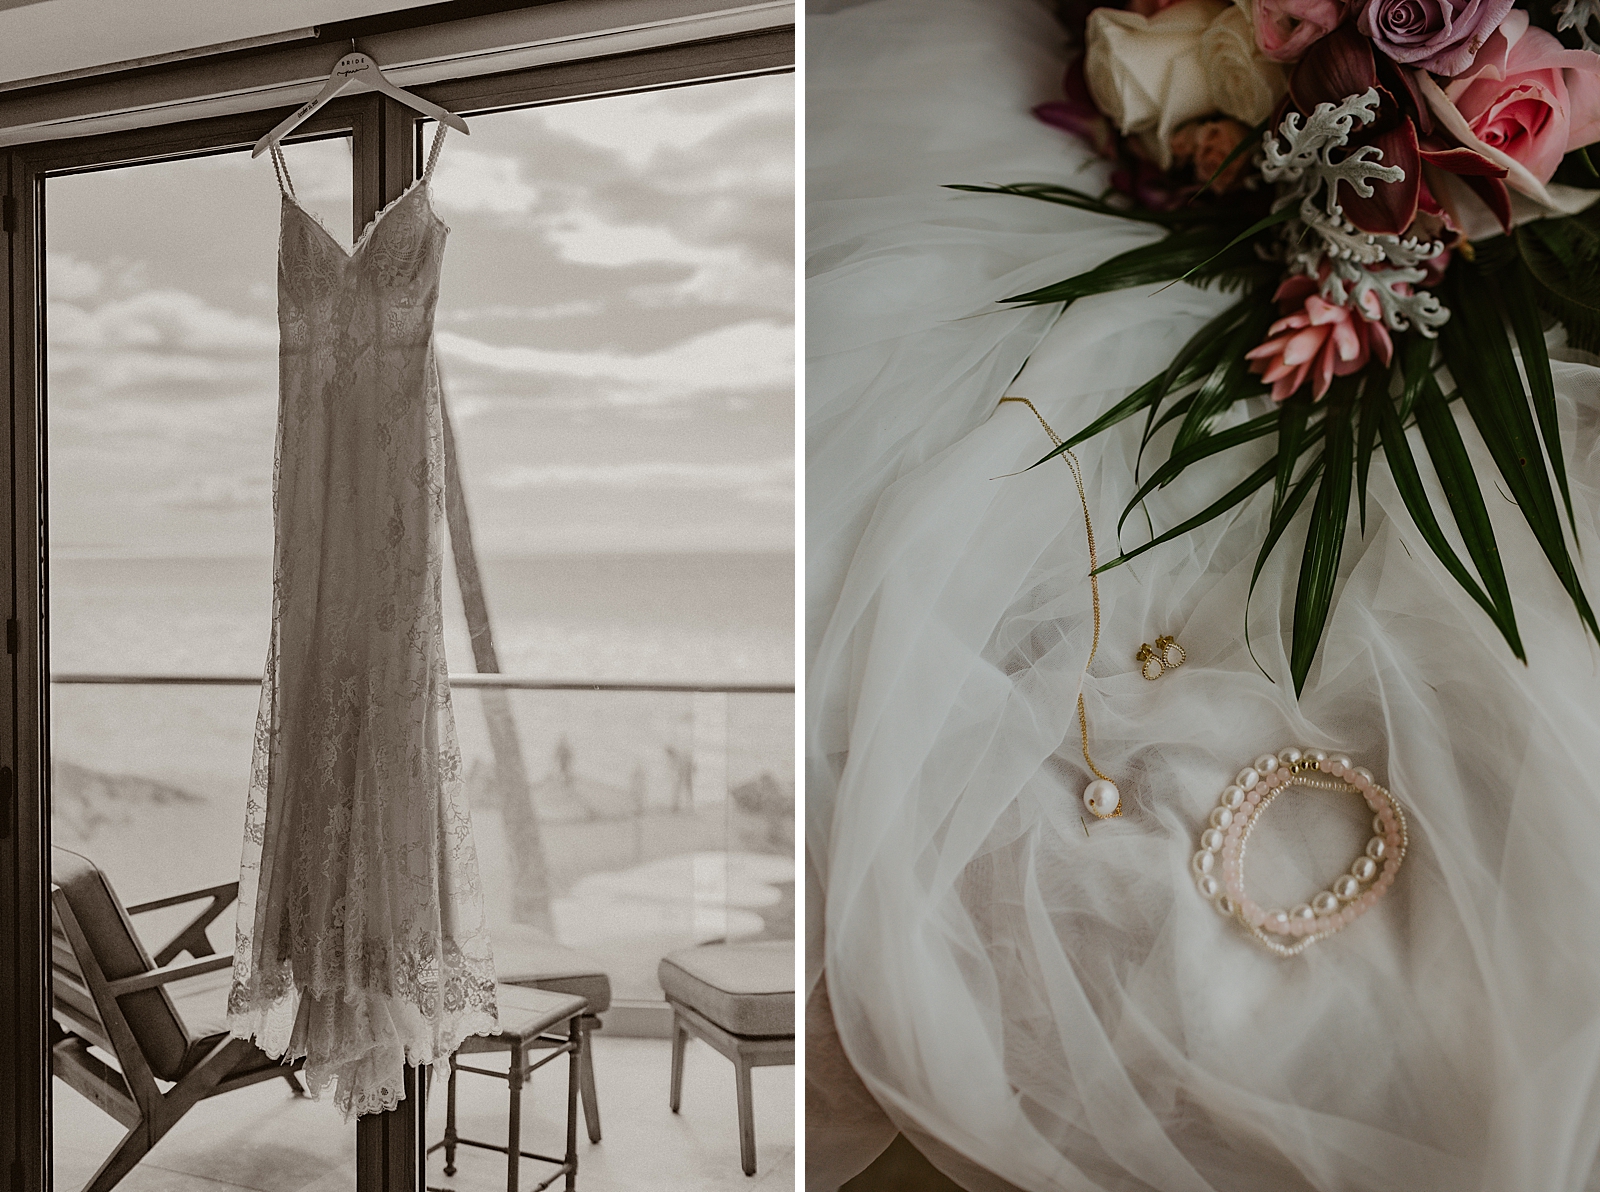 Wedding dress hanging by window and Jewelry detail shots